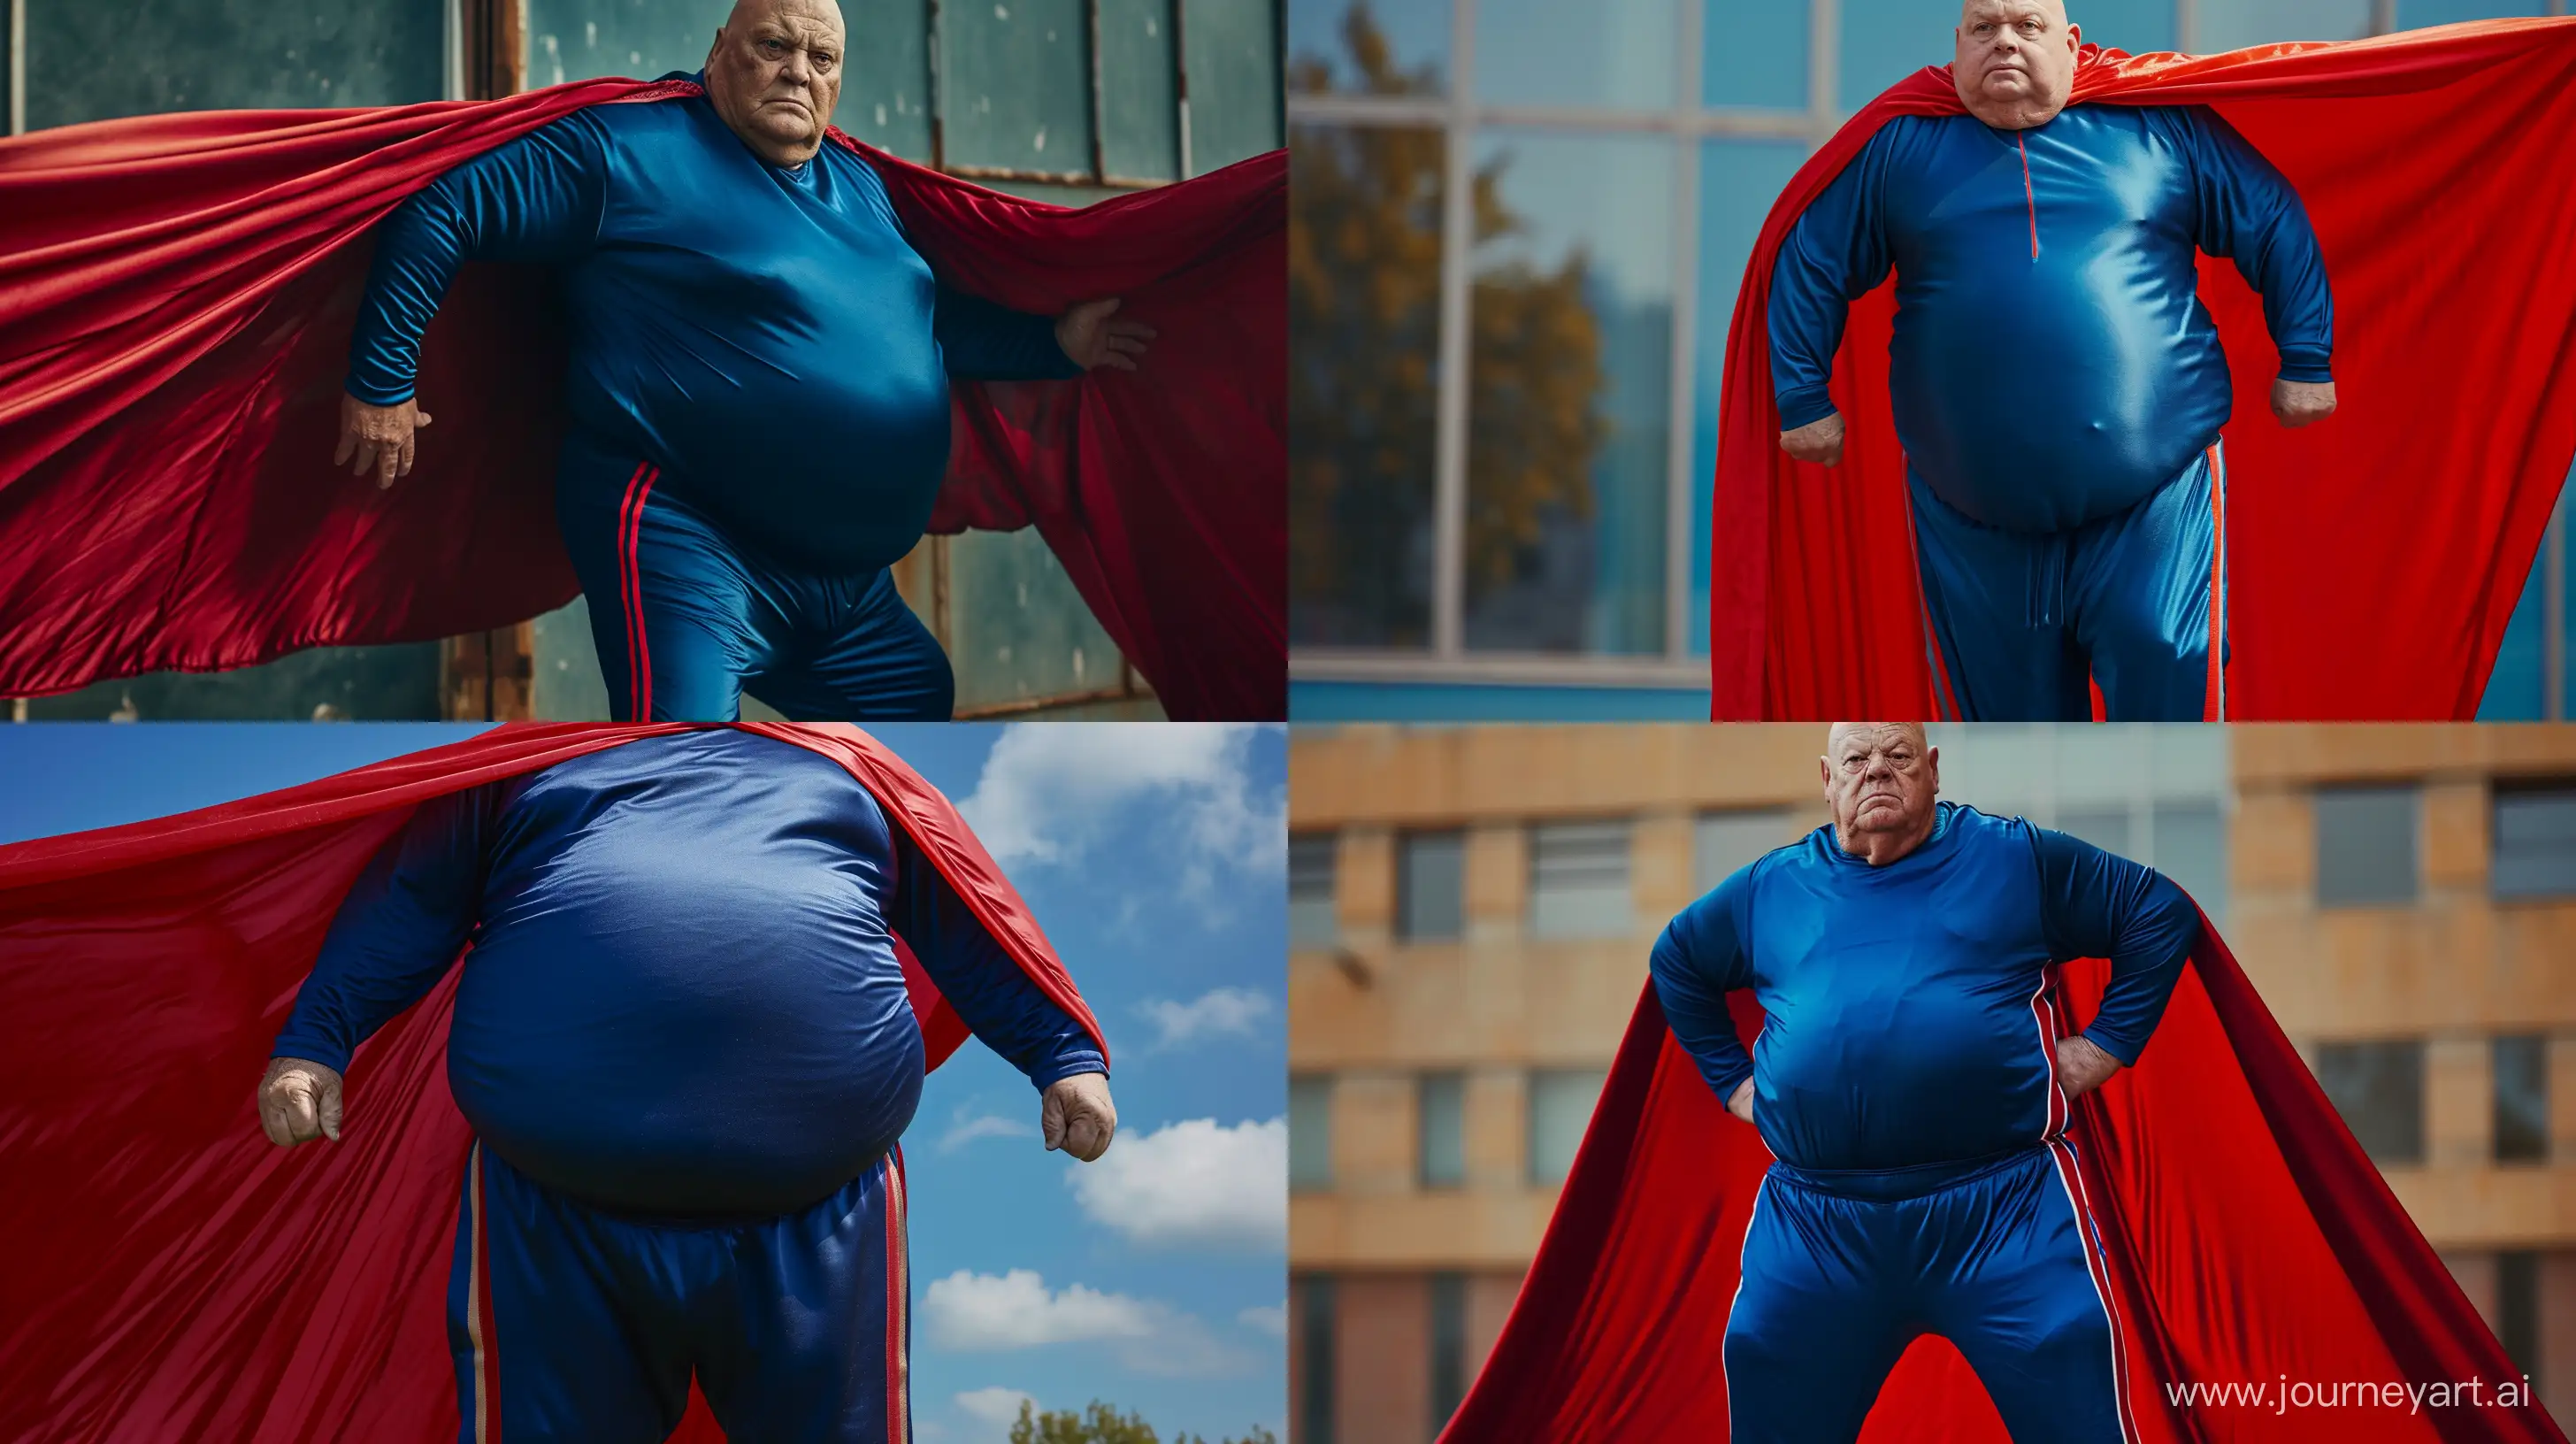 Elderly-Man-in-Regal-Blue-Tracksuit-with-Striped-Pants-and-Bold-Red-Cape